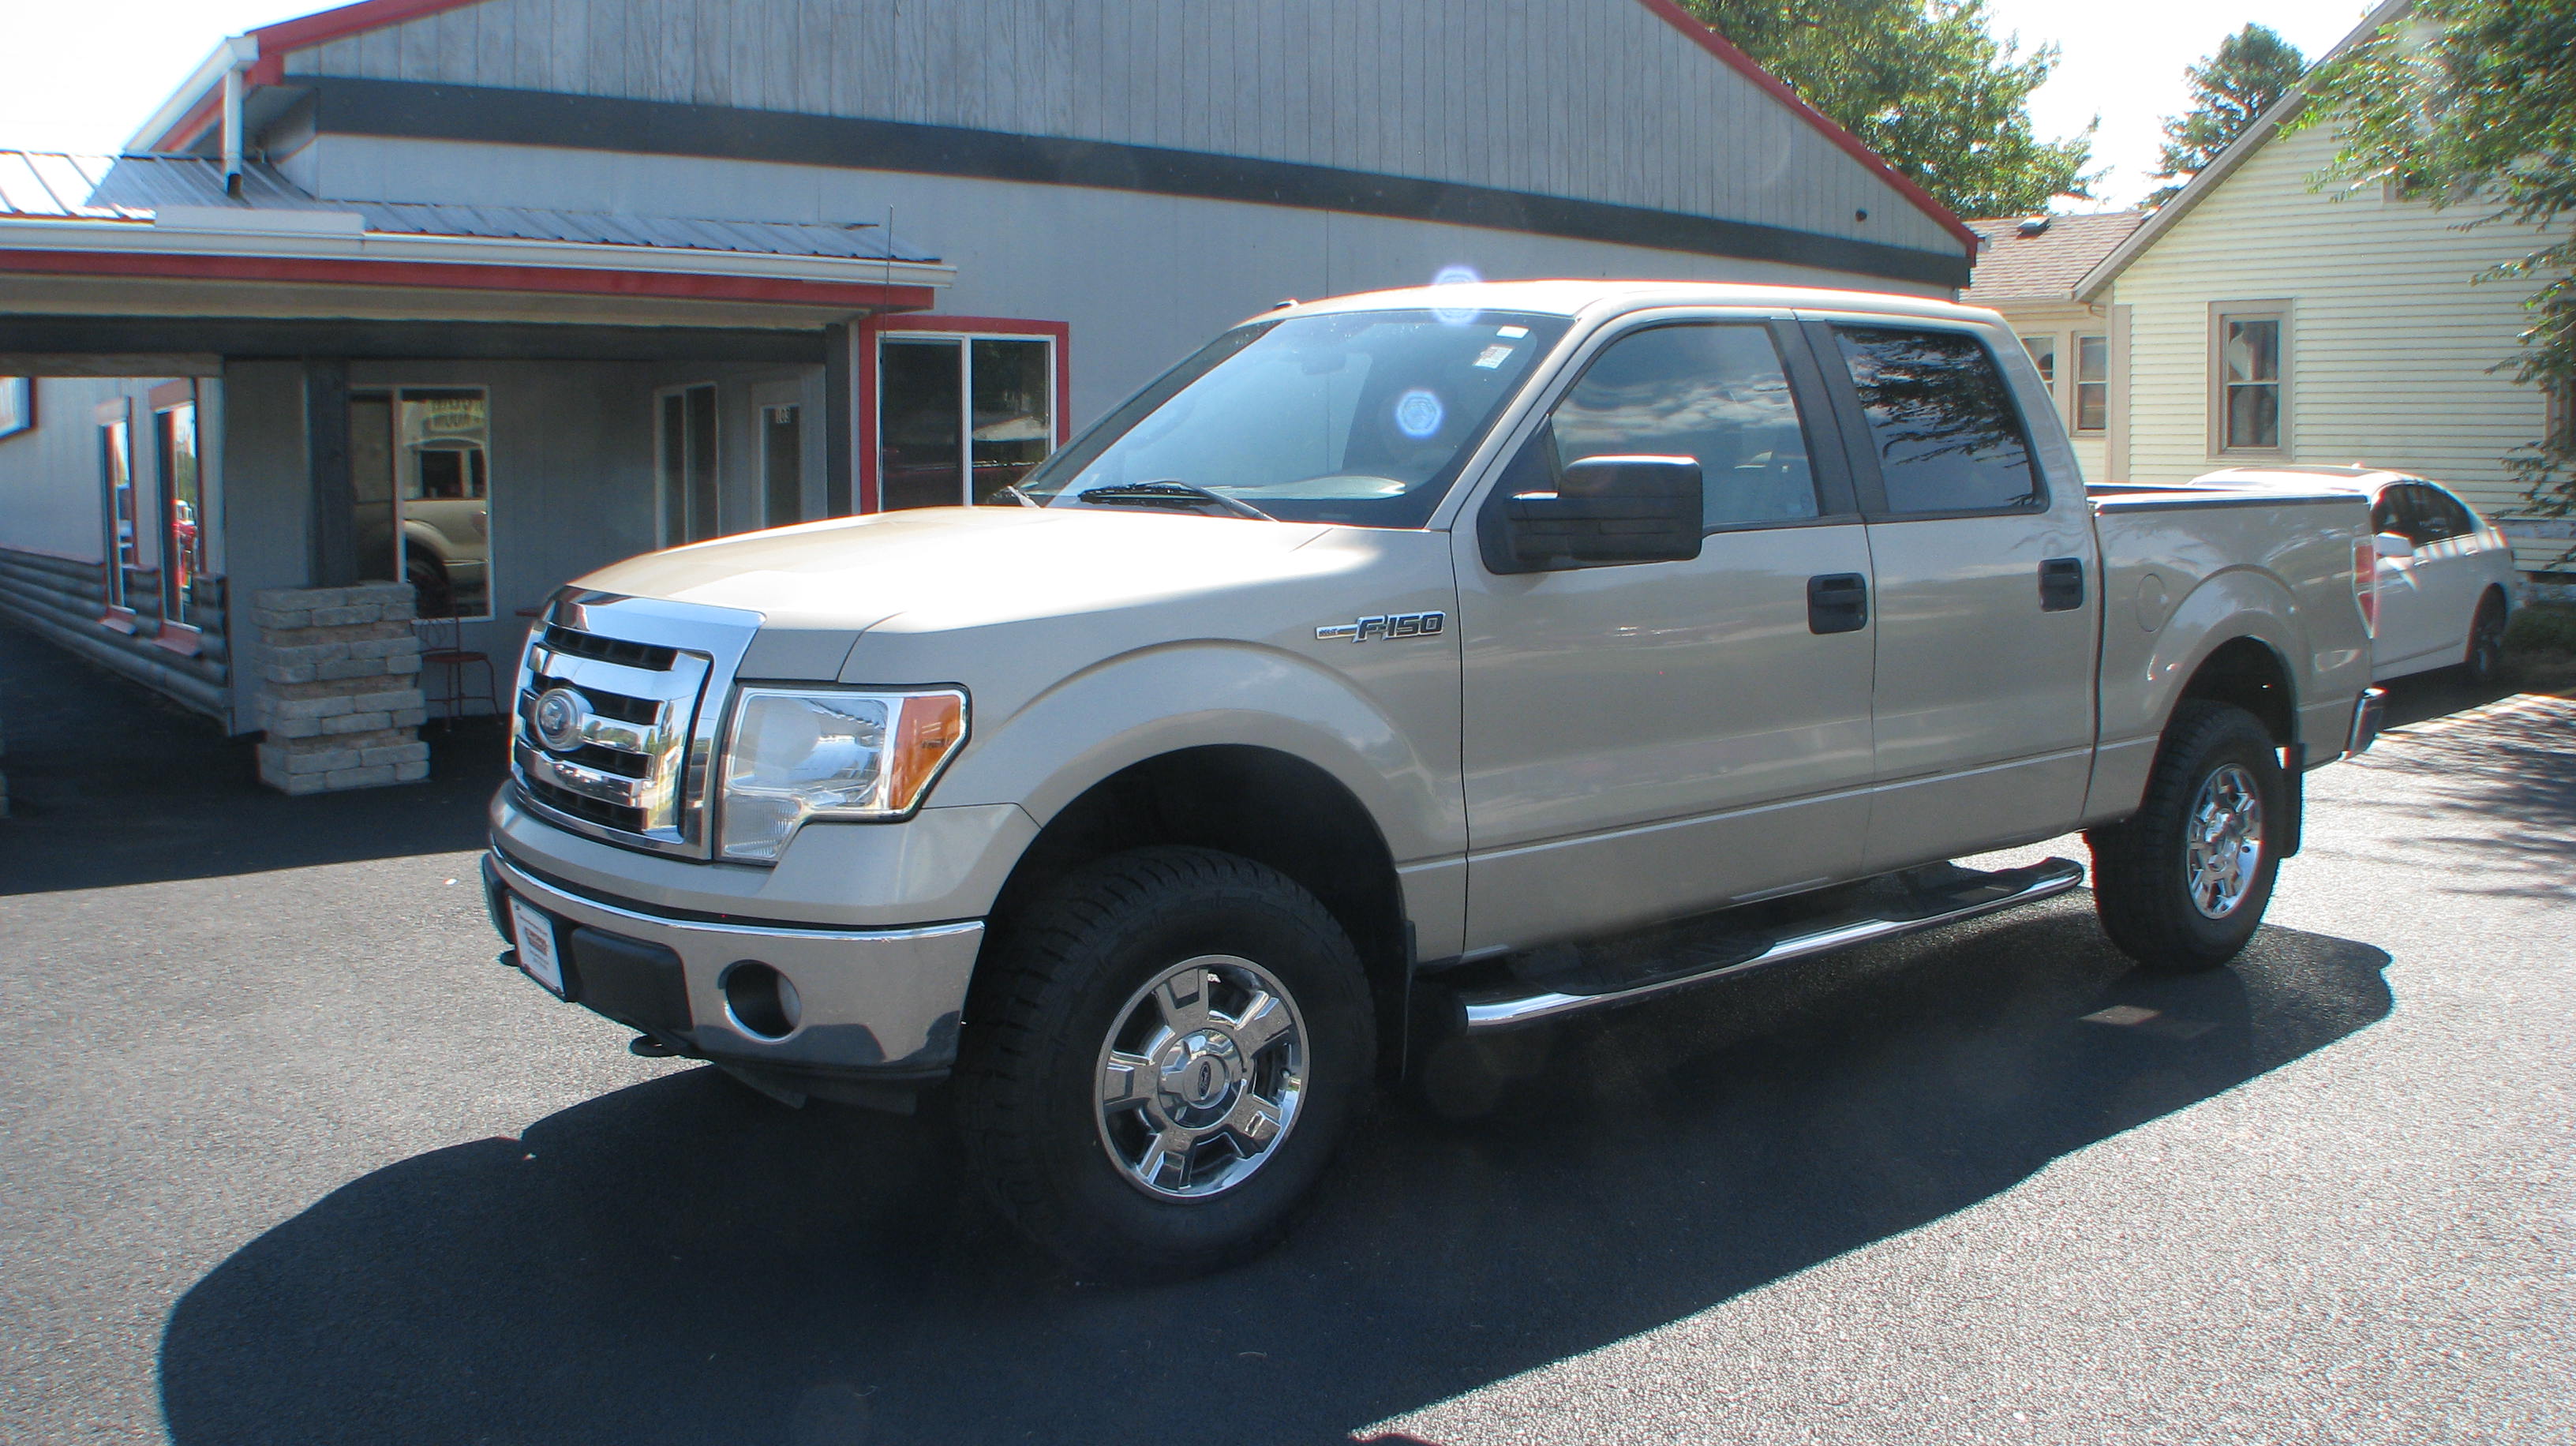 Pre-Owned 2010 Ford F150 4WD Supercrew XLT 5 1/2 in Coal Valley # 2010 Ford F150 5.4 L V8 Towing Capacity